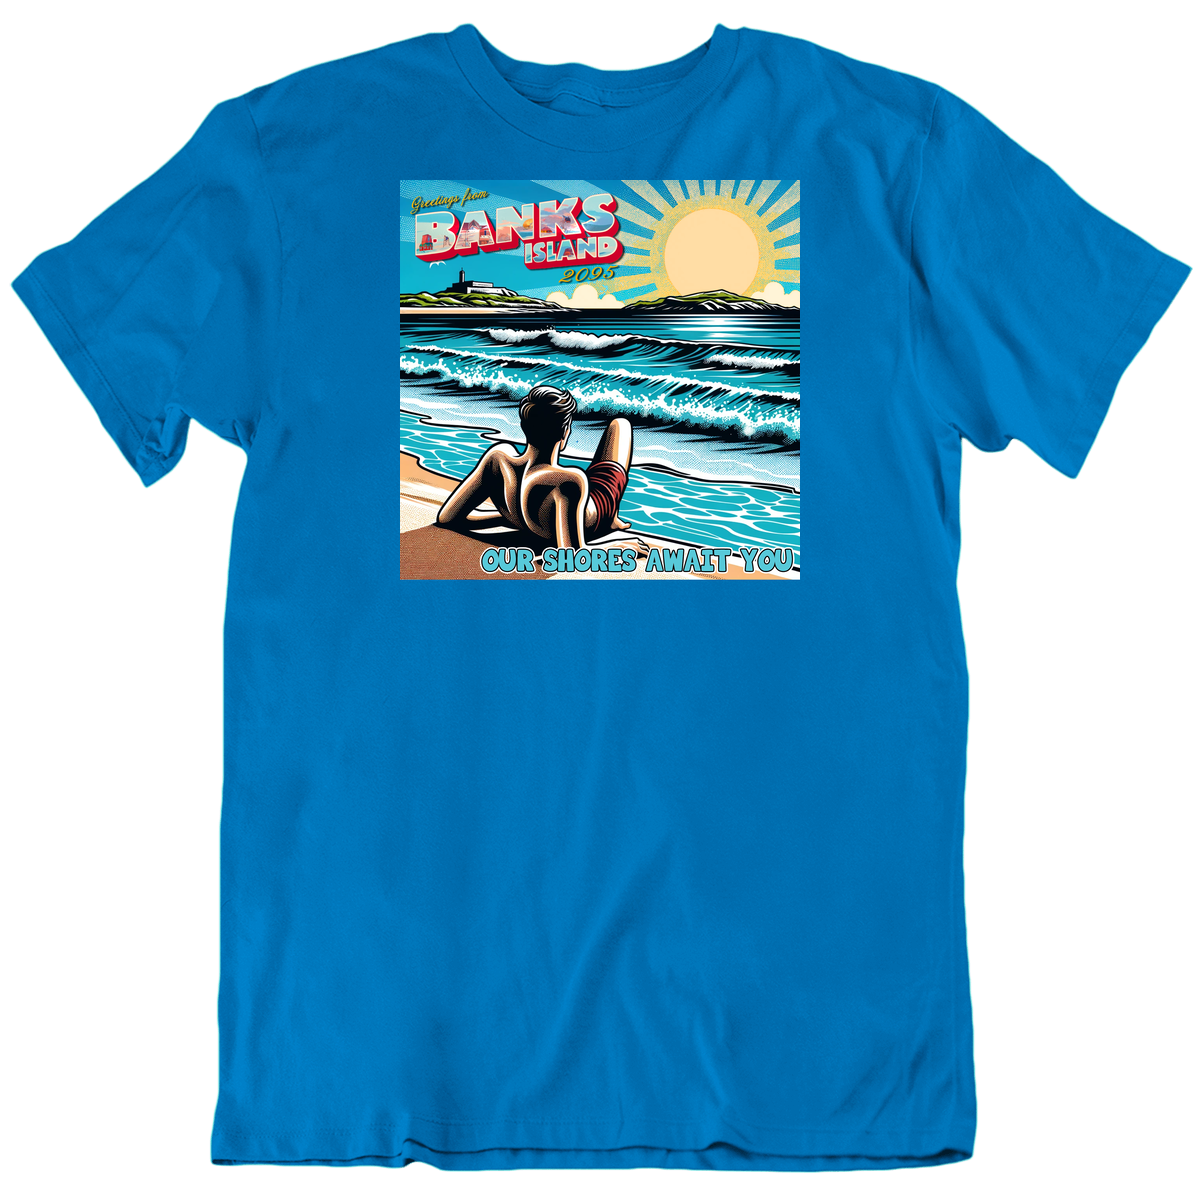 Greetings From Banks Island 2095 Funny Climate Change Parody Travel Ad T Shirt